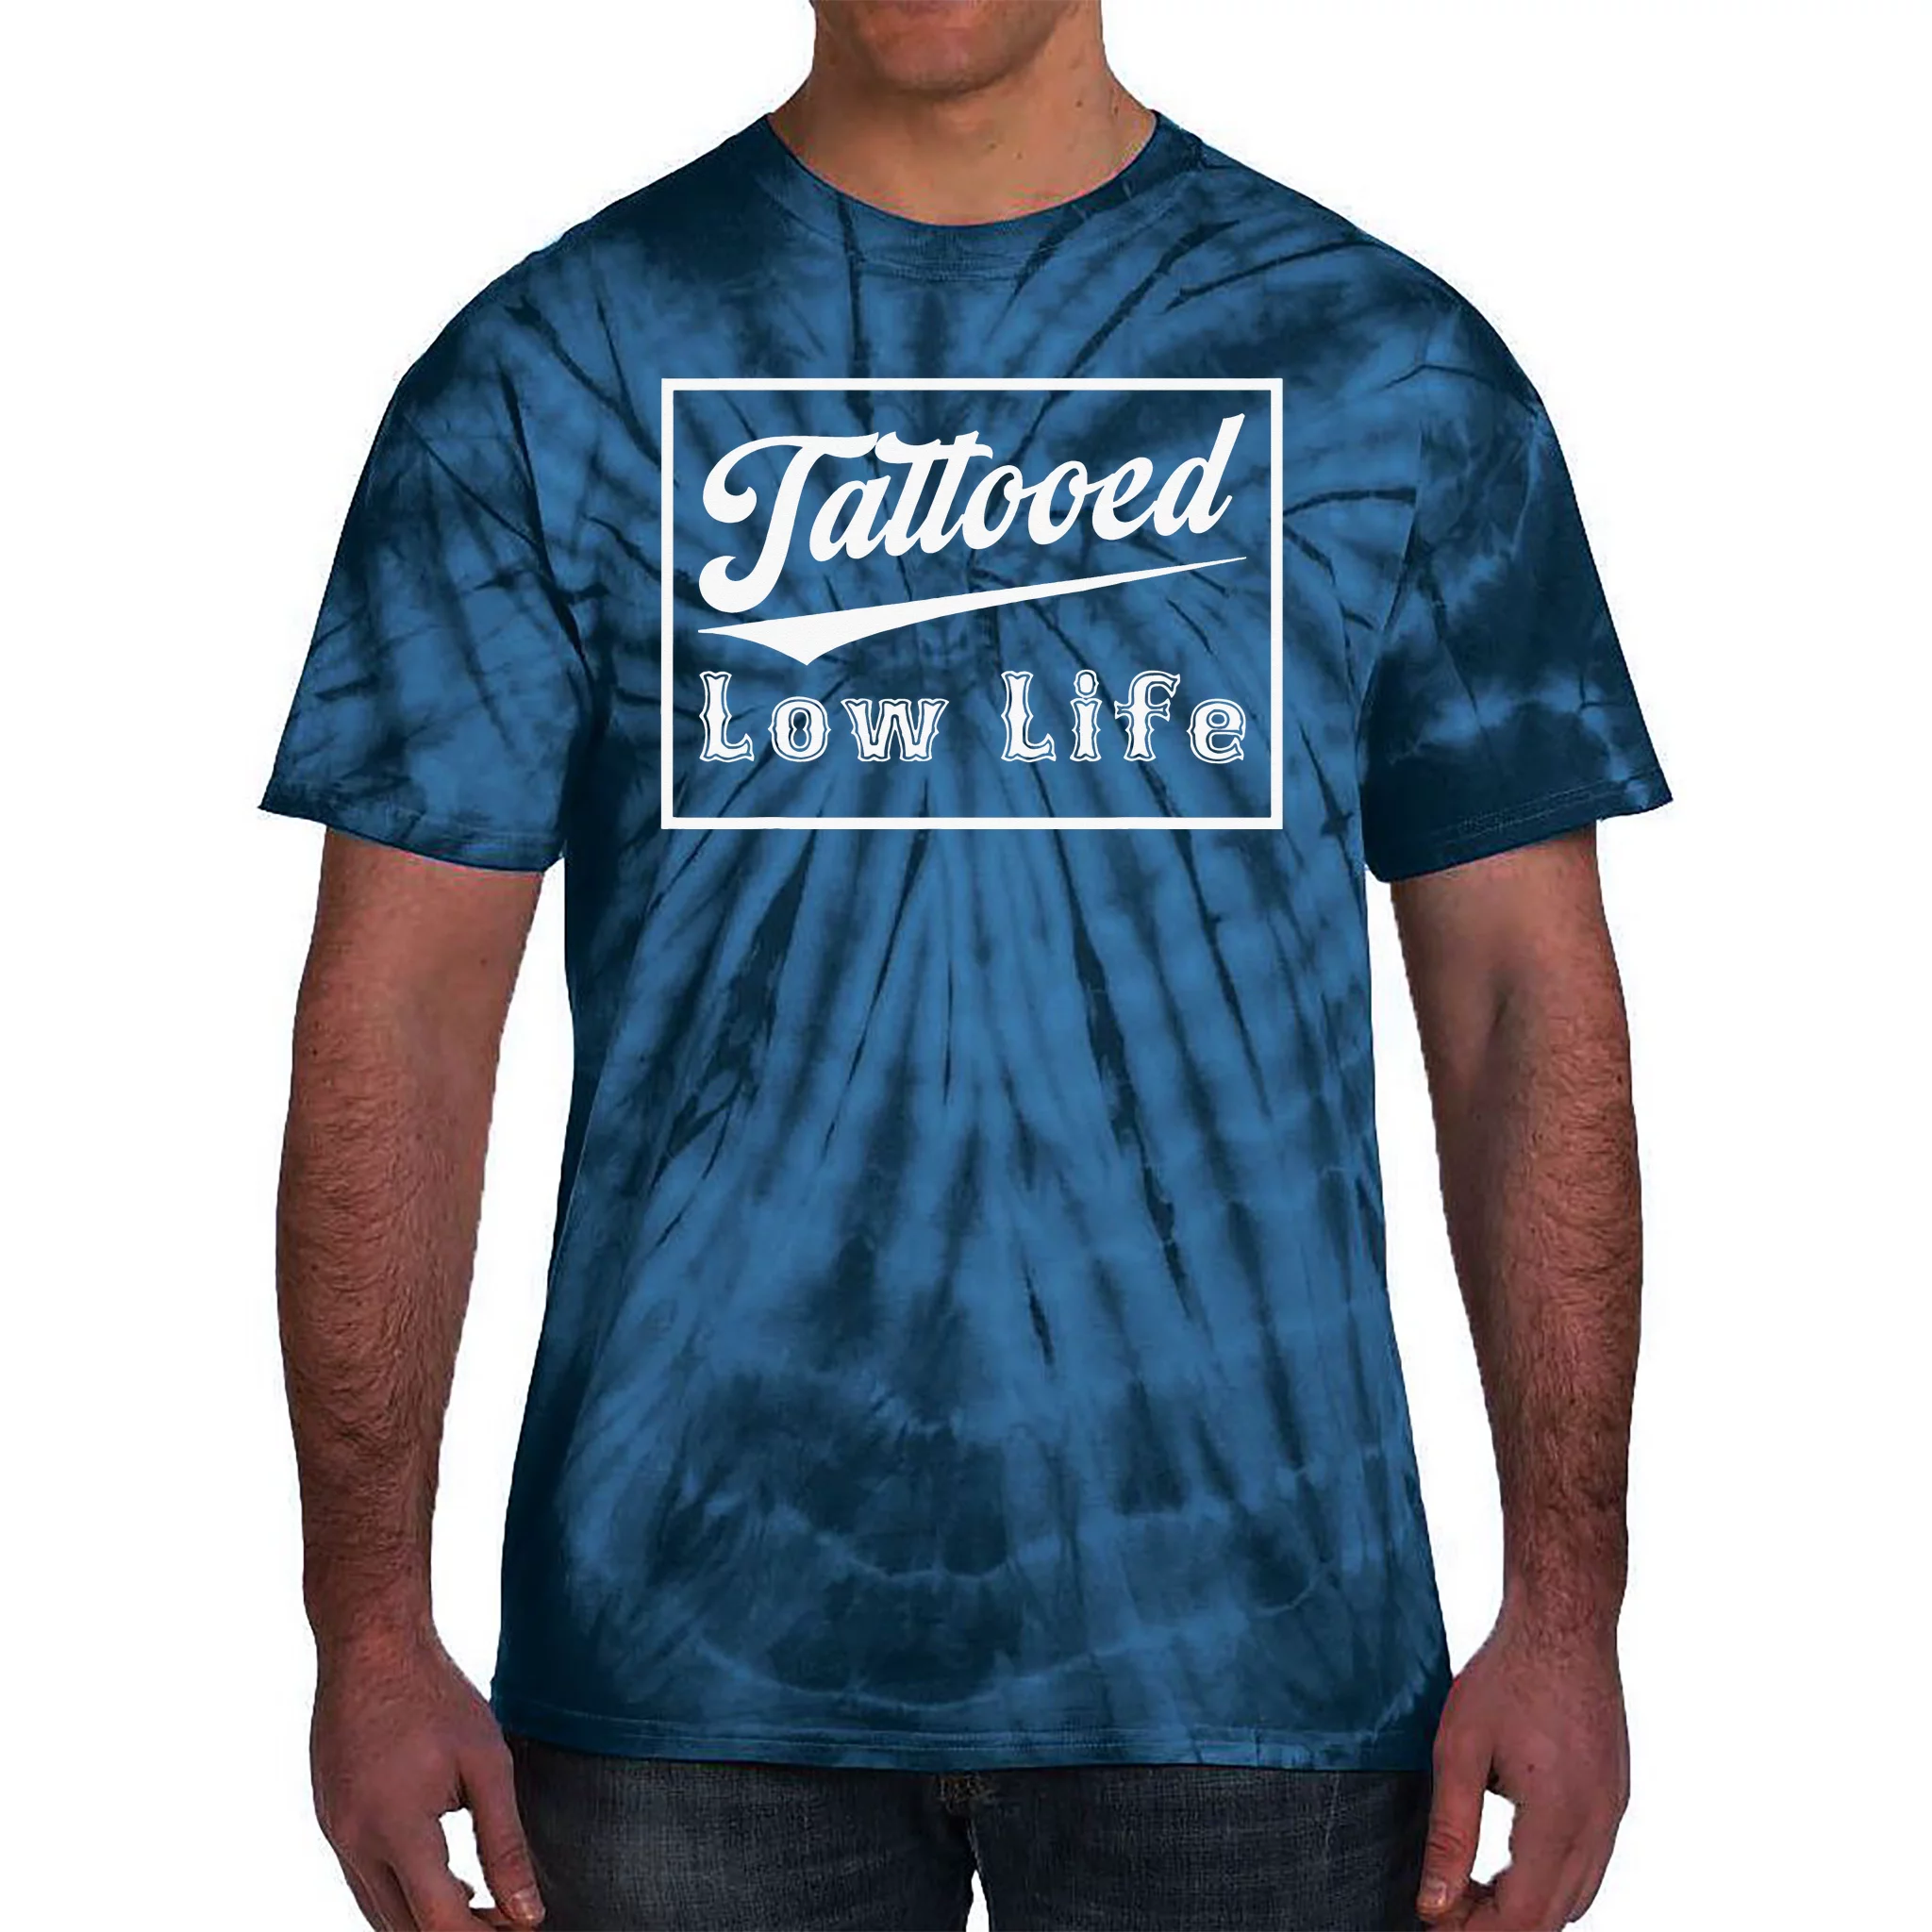 Tattoos Are For Scumbags And Sluts Funny Saying Tattoo Tie-Dye T-Shirt